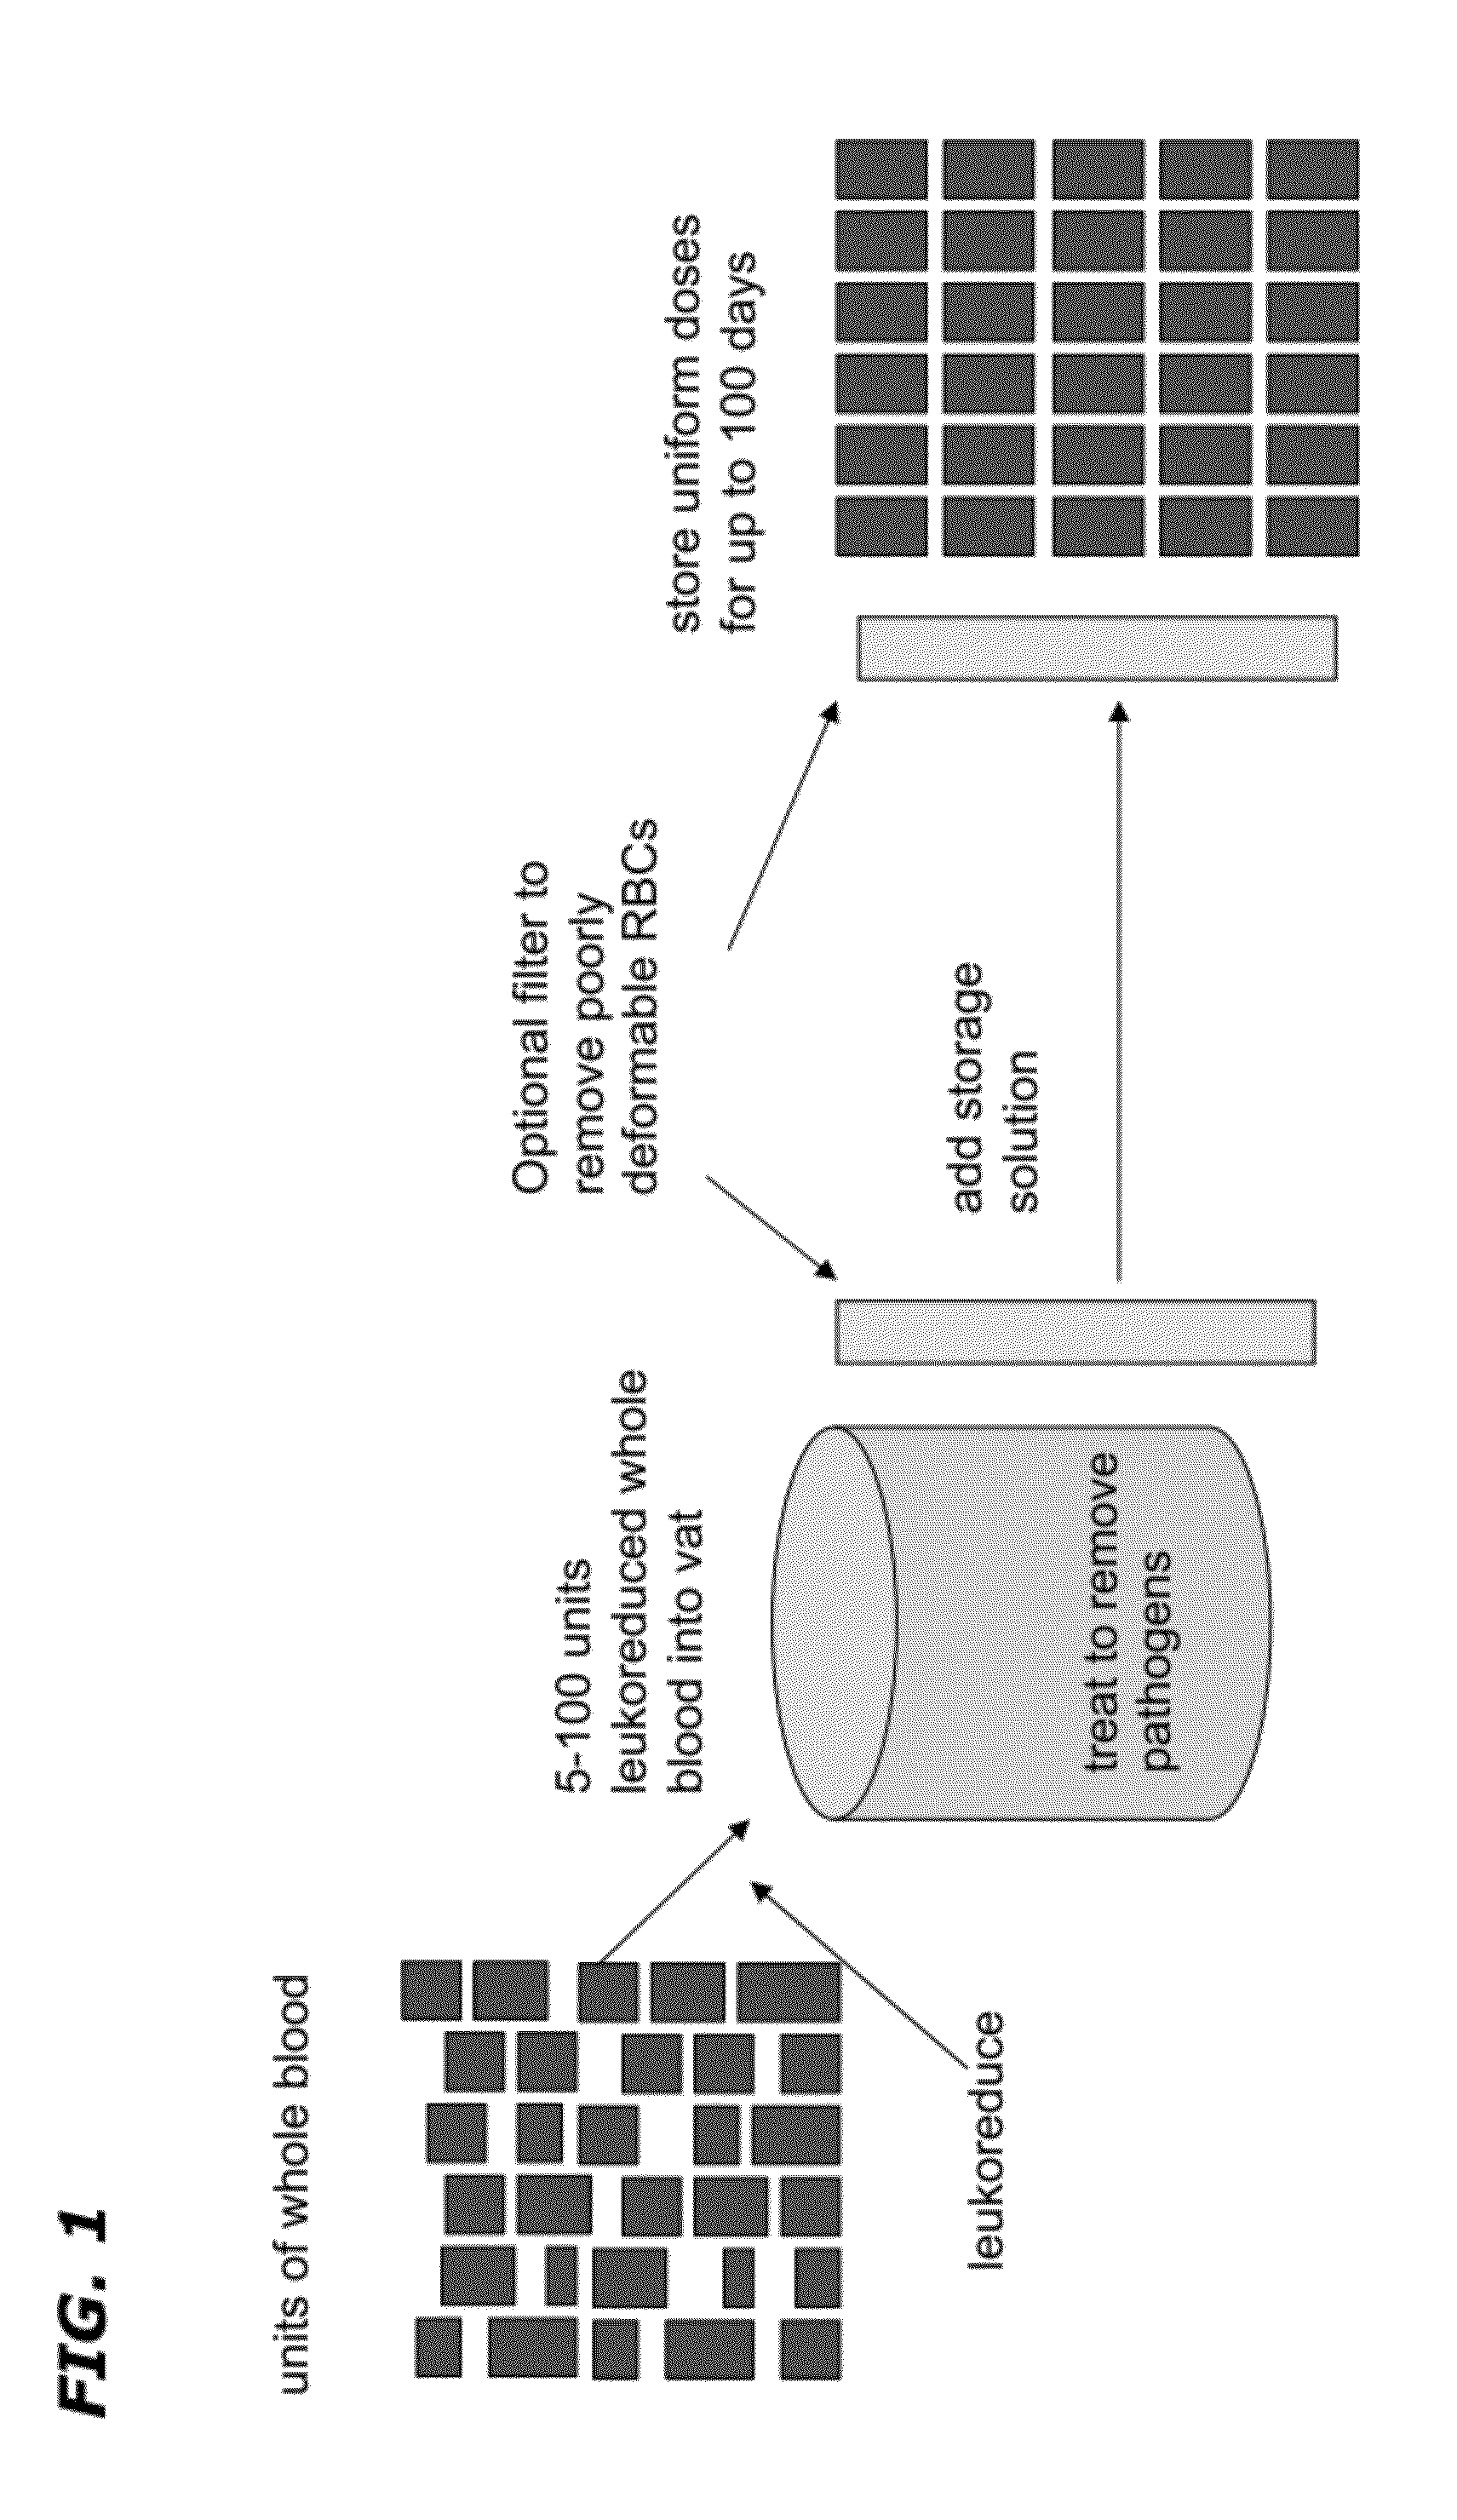 Method of Blood Pooling and Storage